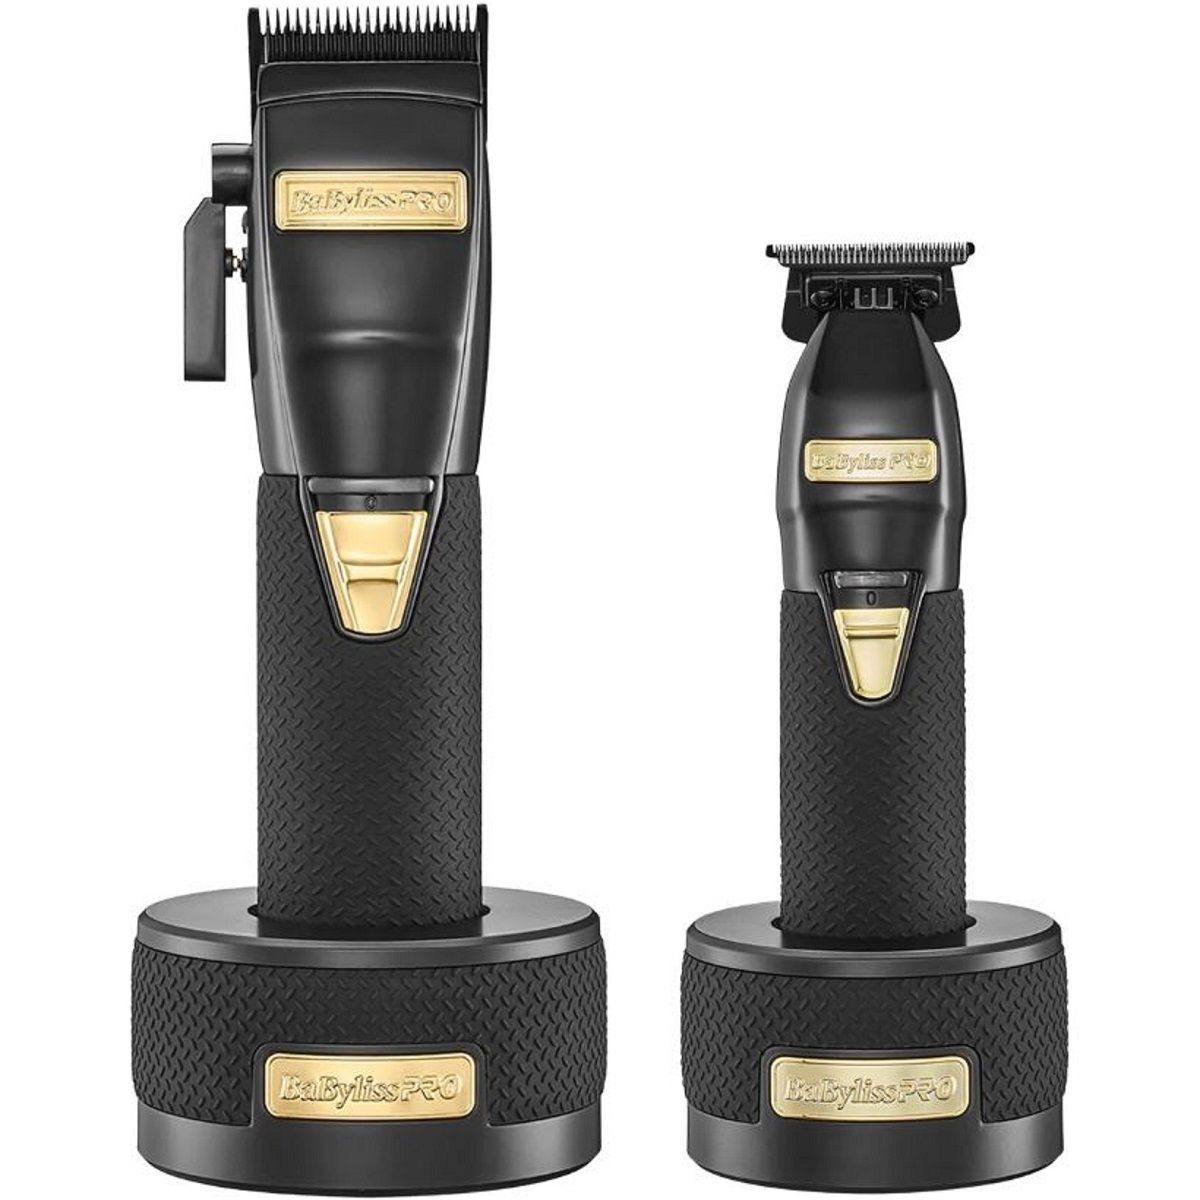 BaByliss PRO FX870BN Metal Lithium Ion Cordless Clippers - Black & Gold  - NEW